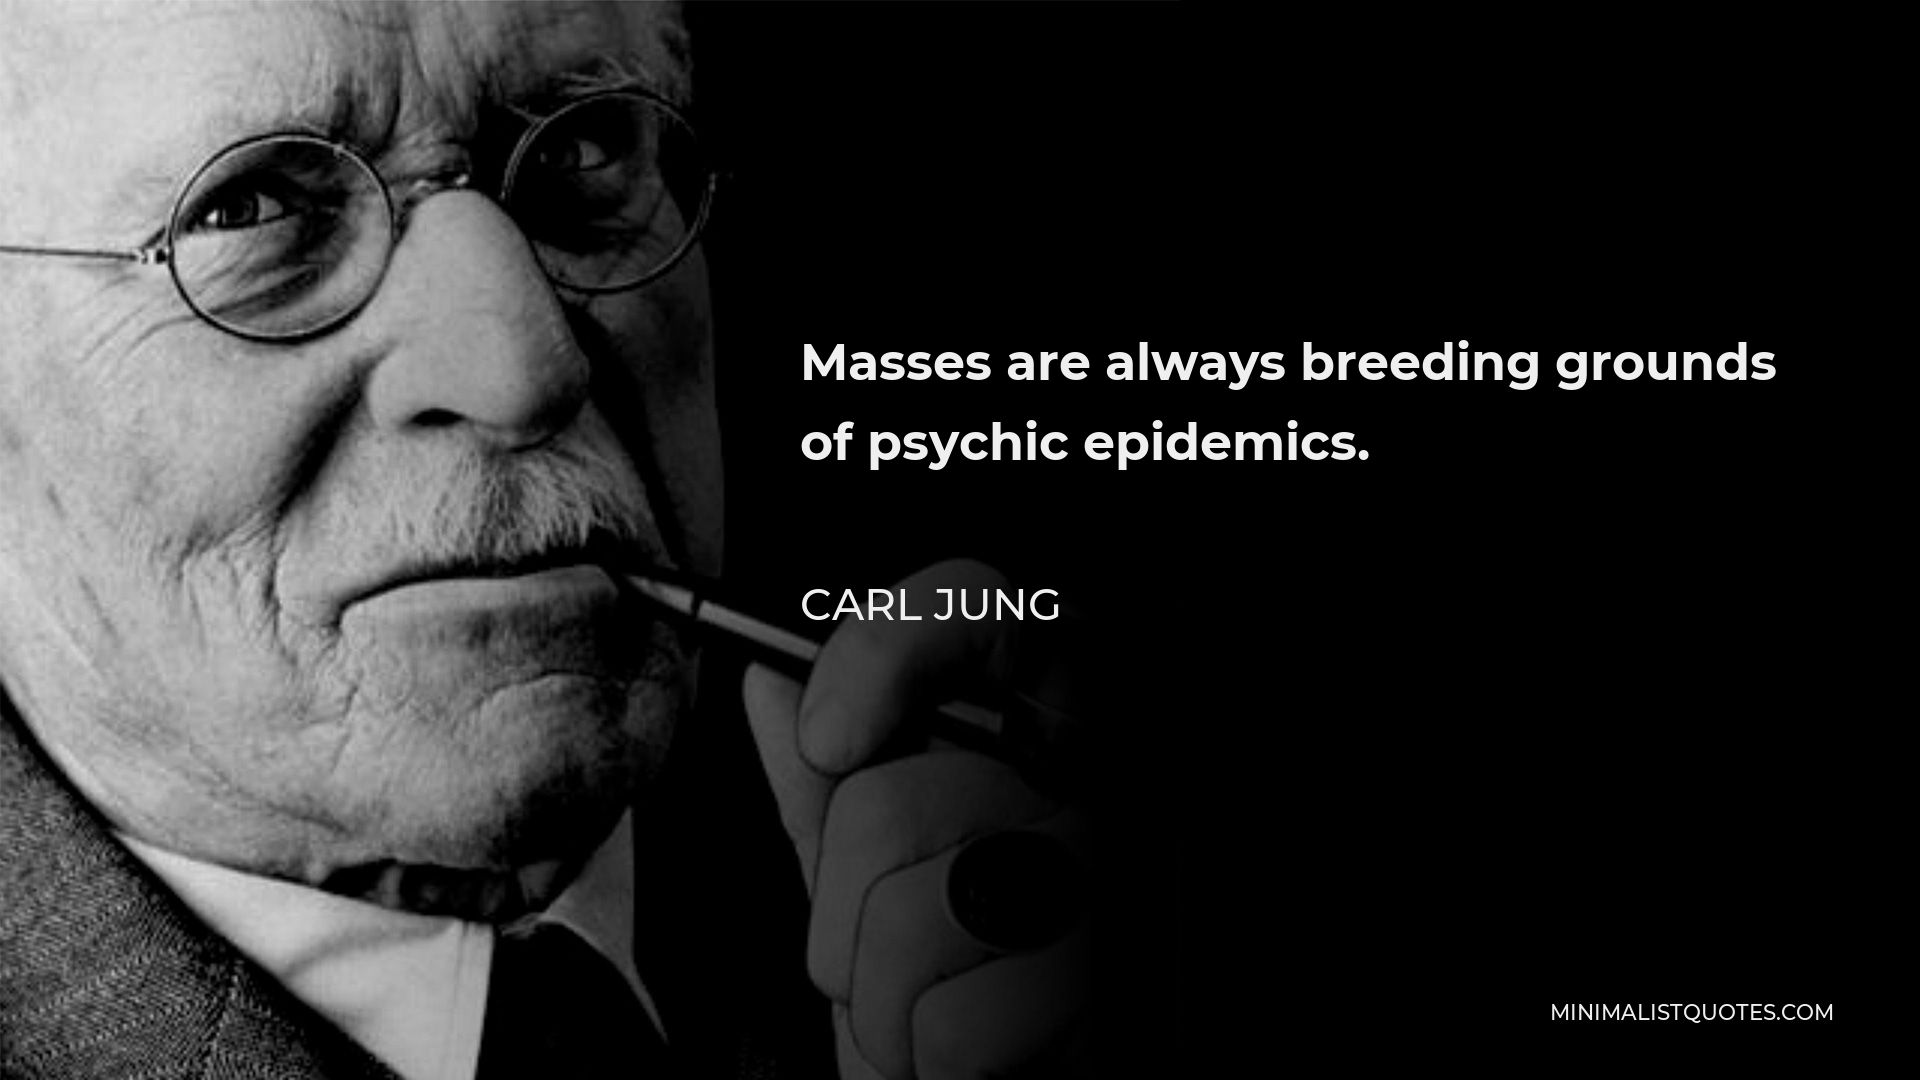 Carl Jung Quote - Masses are always breeding grounds of psychic epidemics.